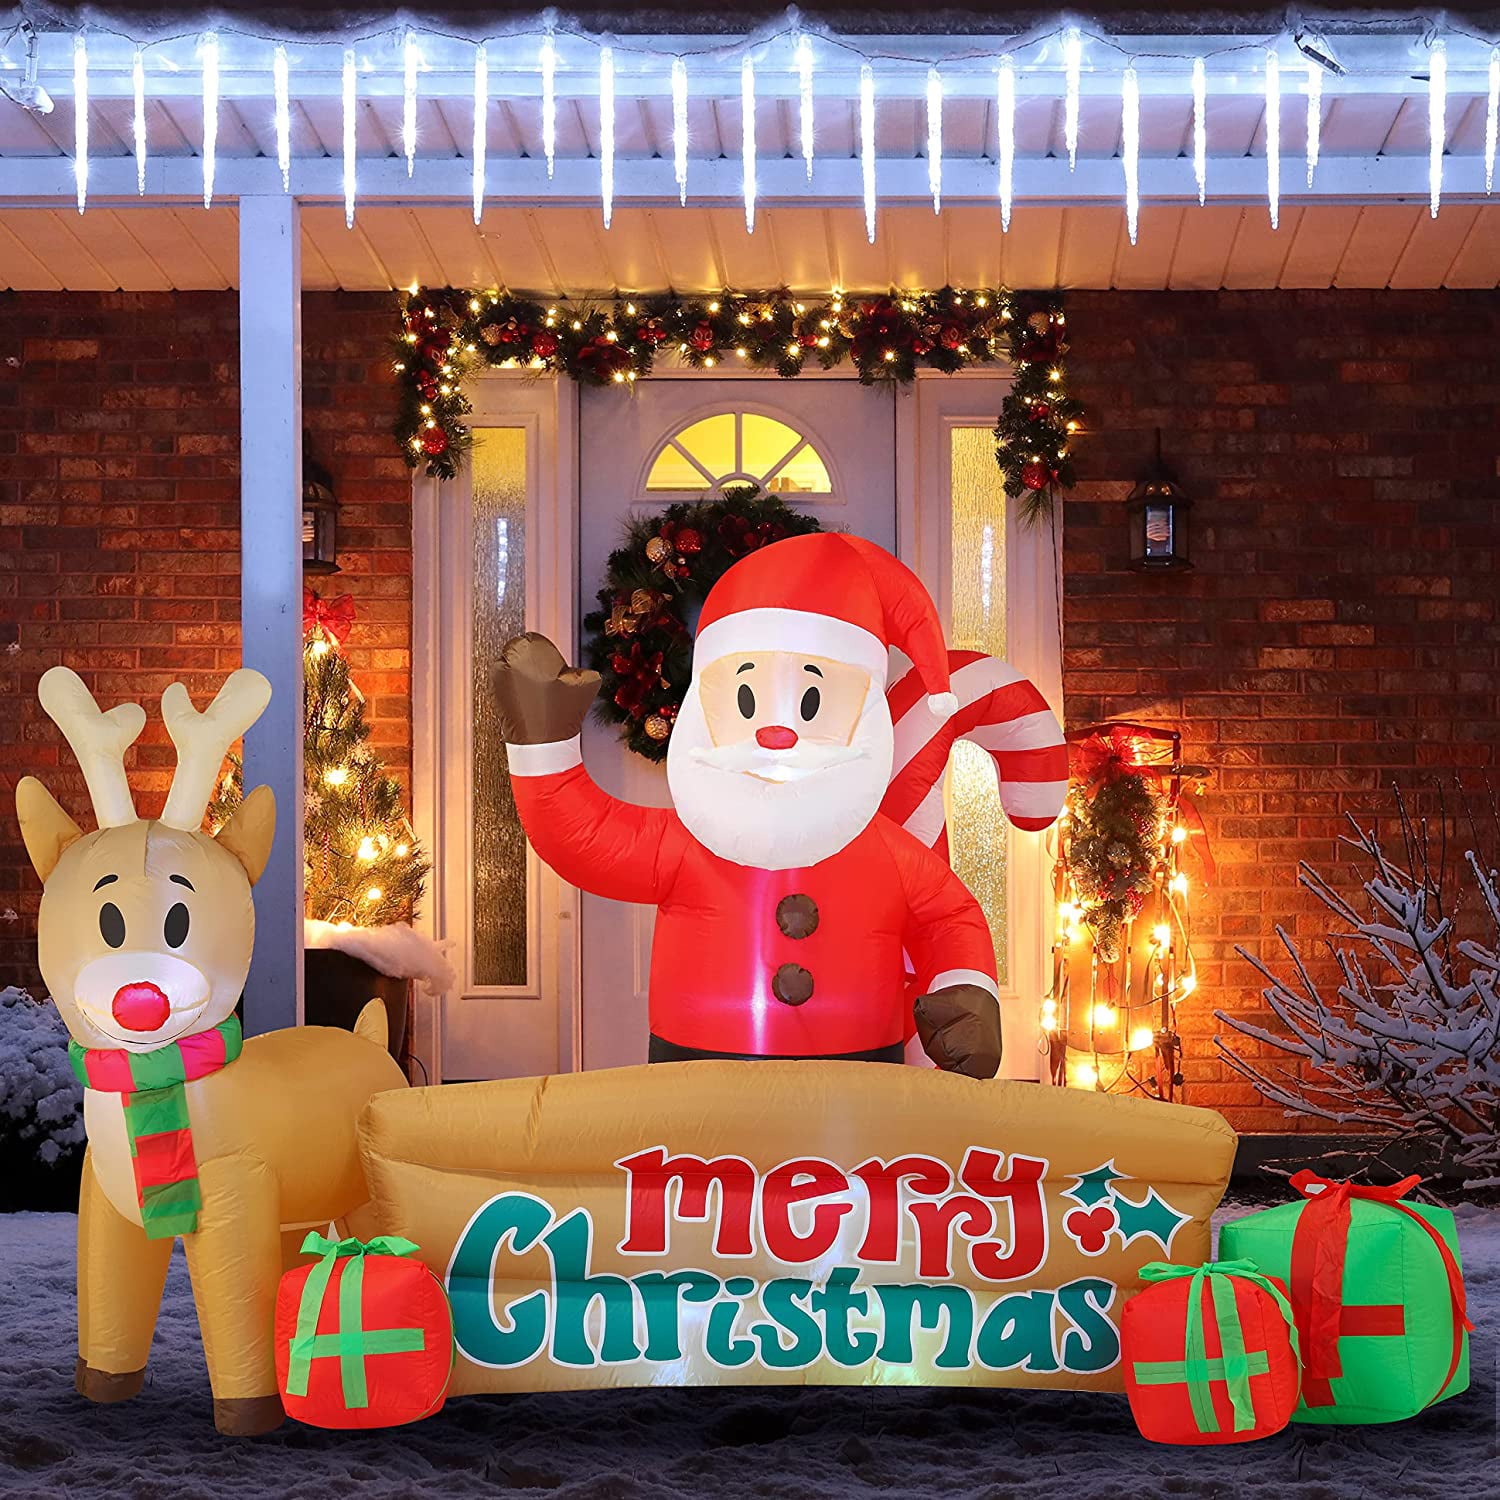 10 FT Long Christmas Inflatable Santa & Reindeer with Merry Christmas Sign, Christmas Inflatable Outdoor Decoration With Build-in LEDs for Xmas Party Indoor, Outdoor, Yard, Garden, Lawn Dcor